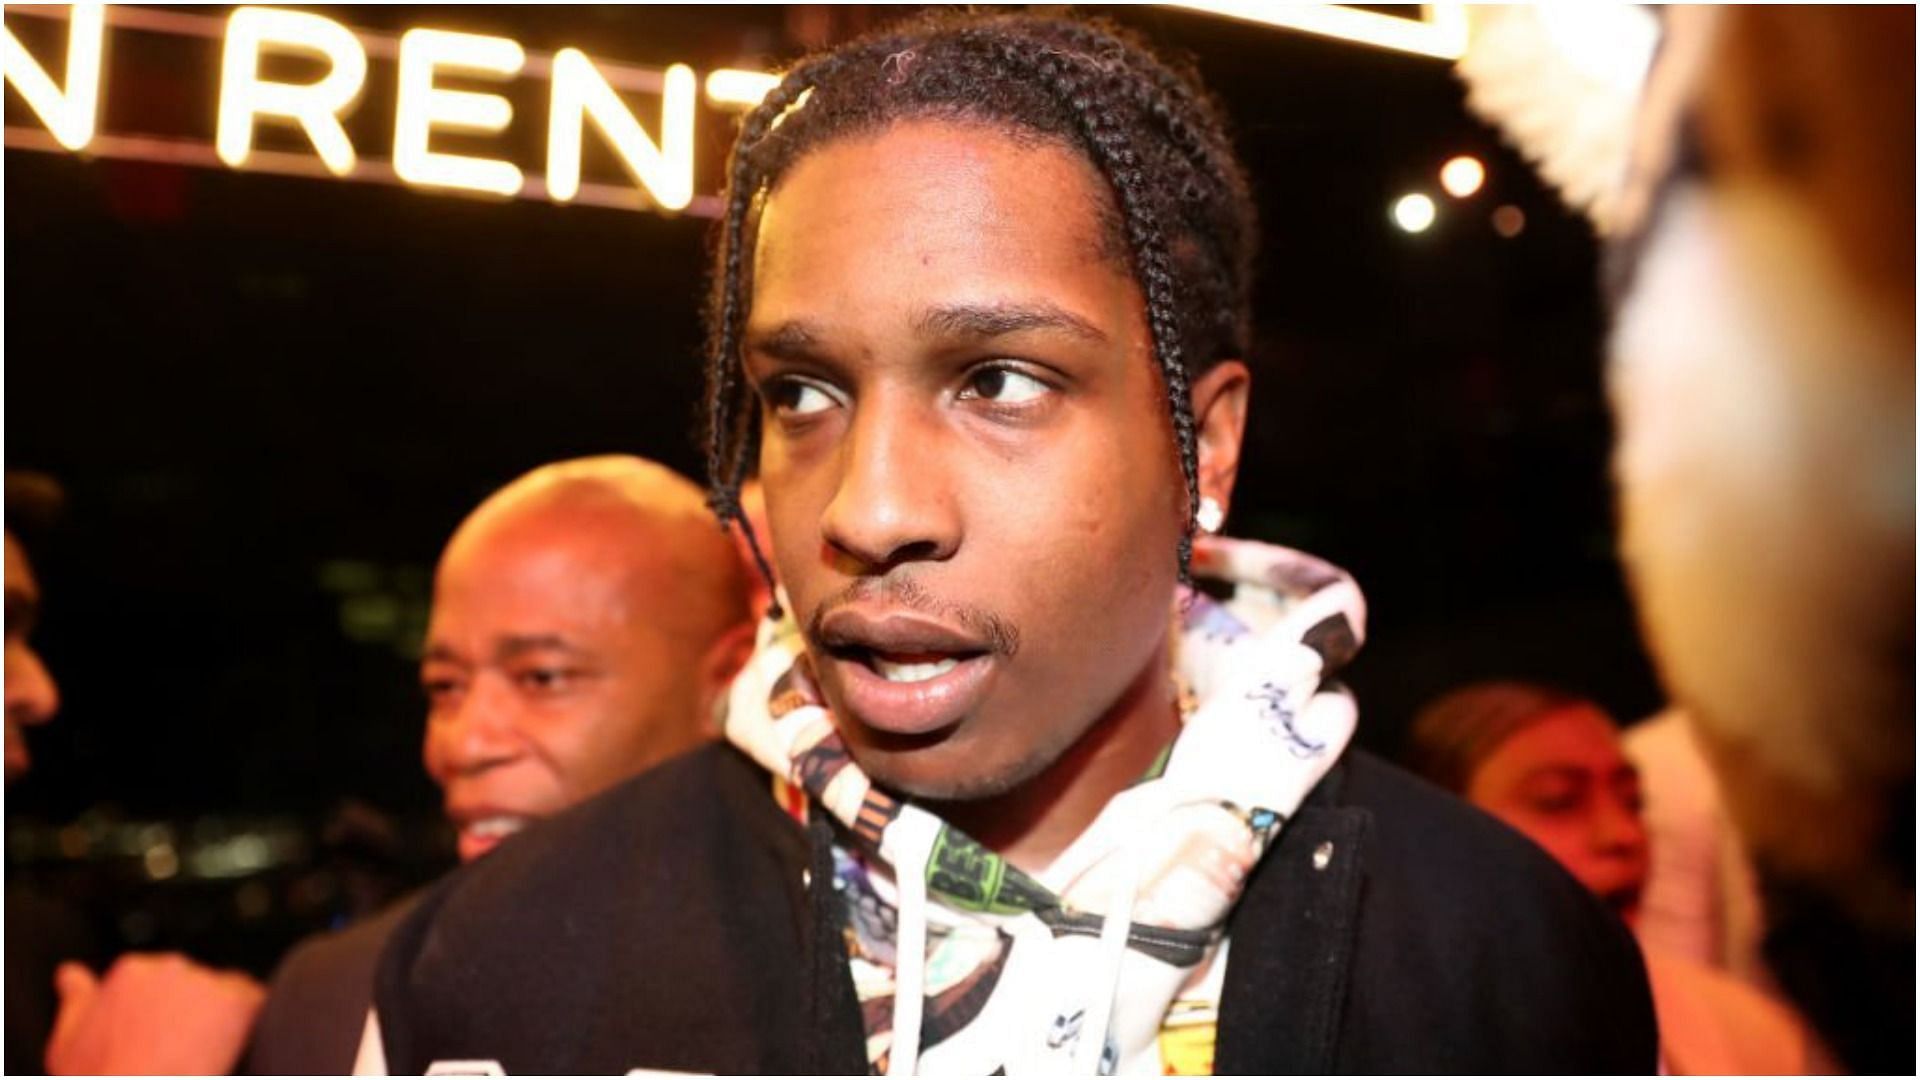 ASAP Rocky was arrested in April 20 in relation to a shooting incident in November 2021 (Image via Johnny Nunez/Getty Images)